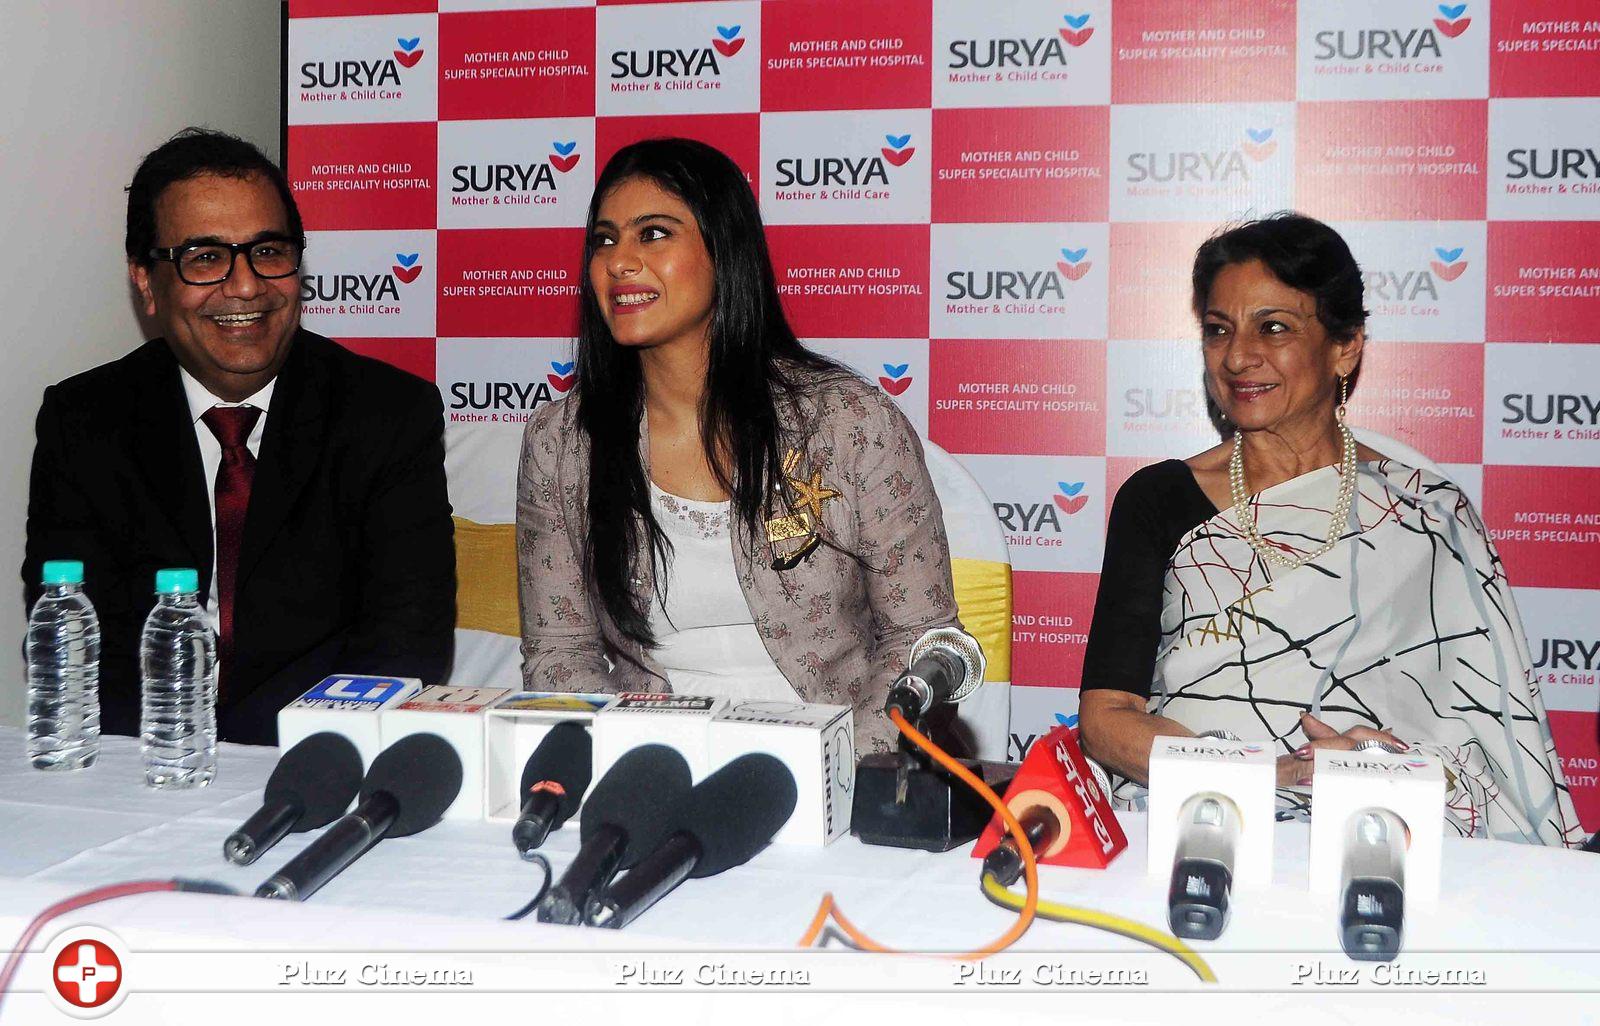 Kajol - Kajol Devgn and Tanuja Inaugurated Surya Mother and Child Care Hospital Stills | Picture 1010099